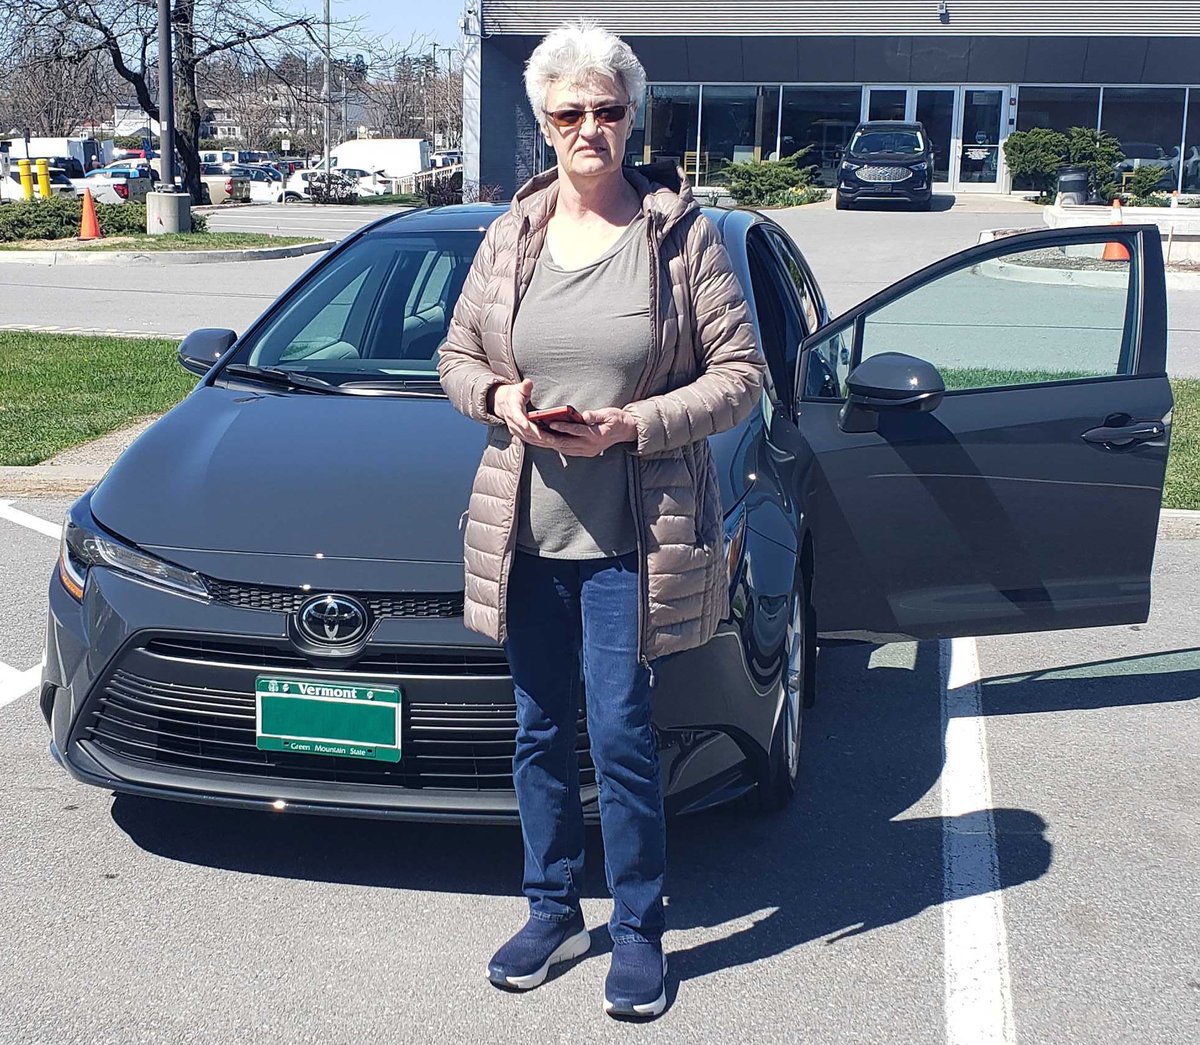 Happy #NewCarDay to Elvira! She renewed her lease and joined the @Toyota #CorollaClub with this new 2024, thanks to some help from Frankie Candido - Congrats!

Learn more about Frankie & check out his reviews on @DealerRater: bit.ly/3GjW6h3

#Toyota #LetsGoPlaces #HTeam